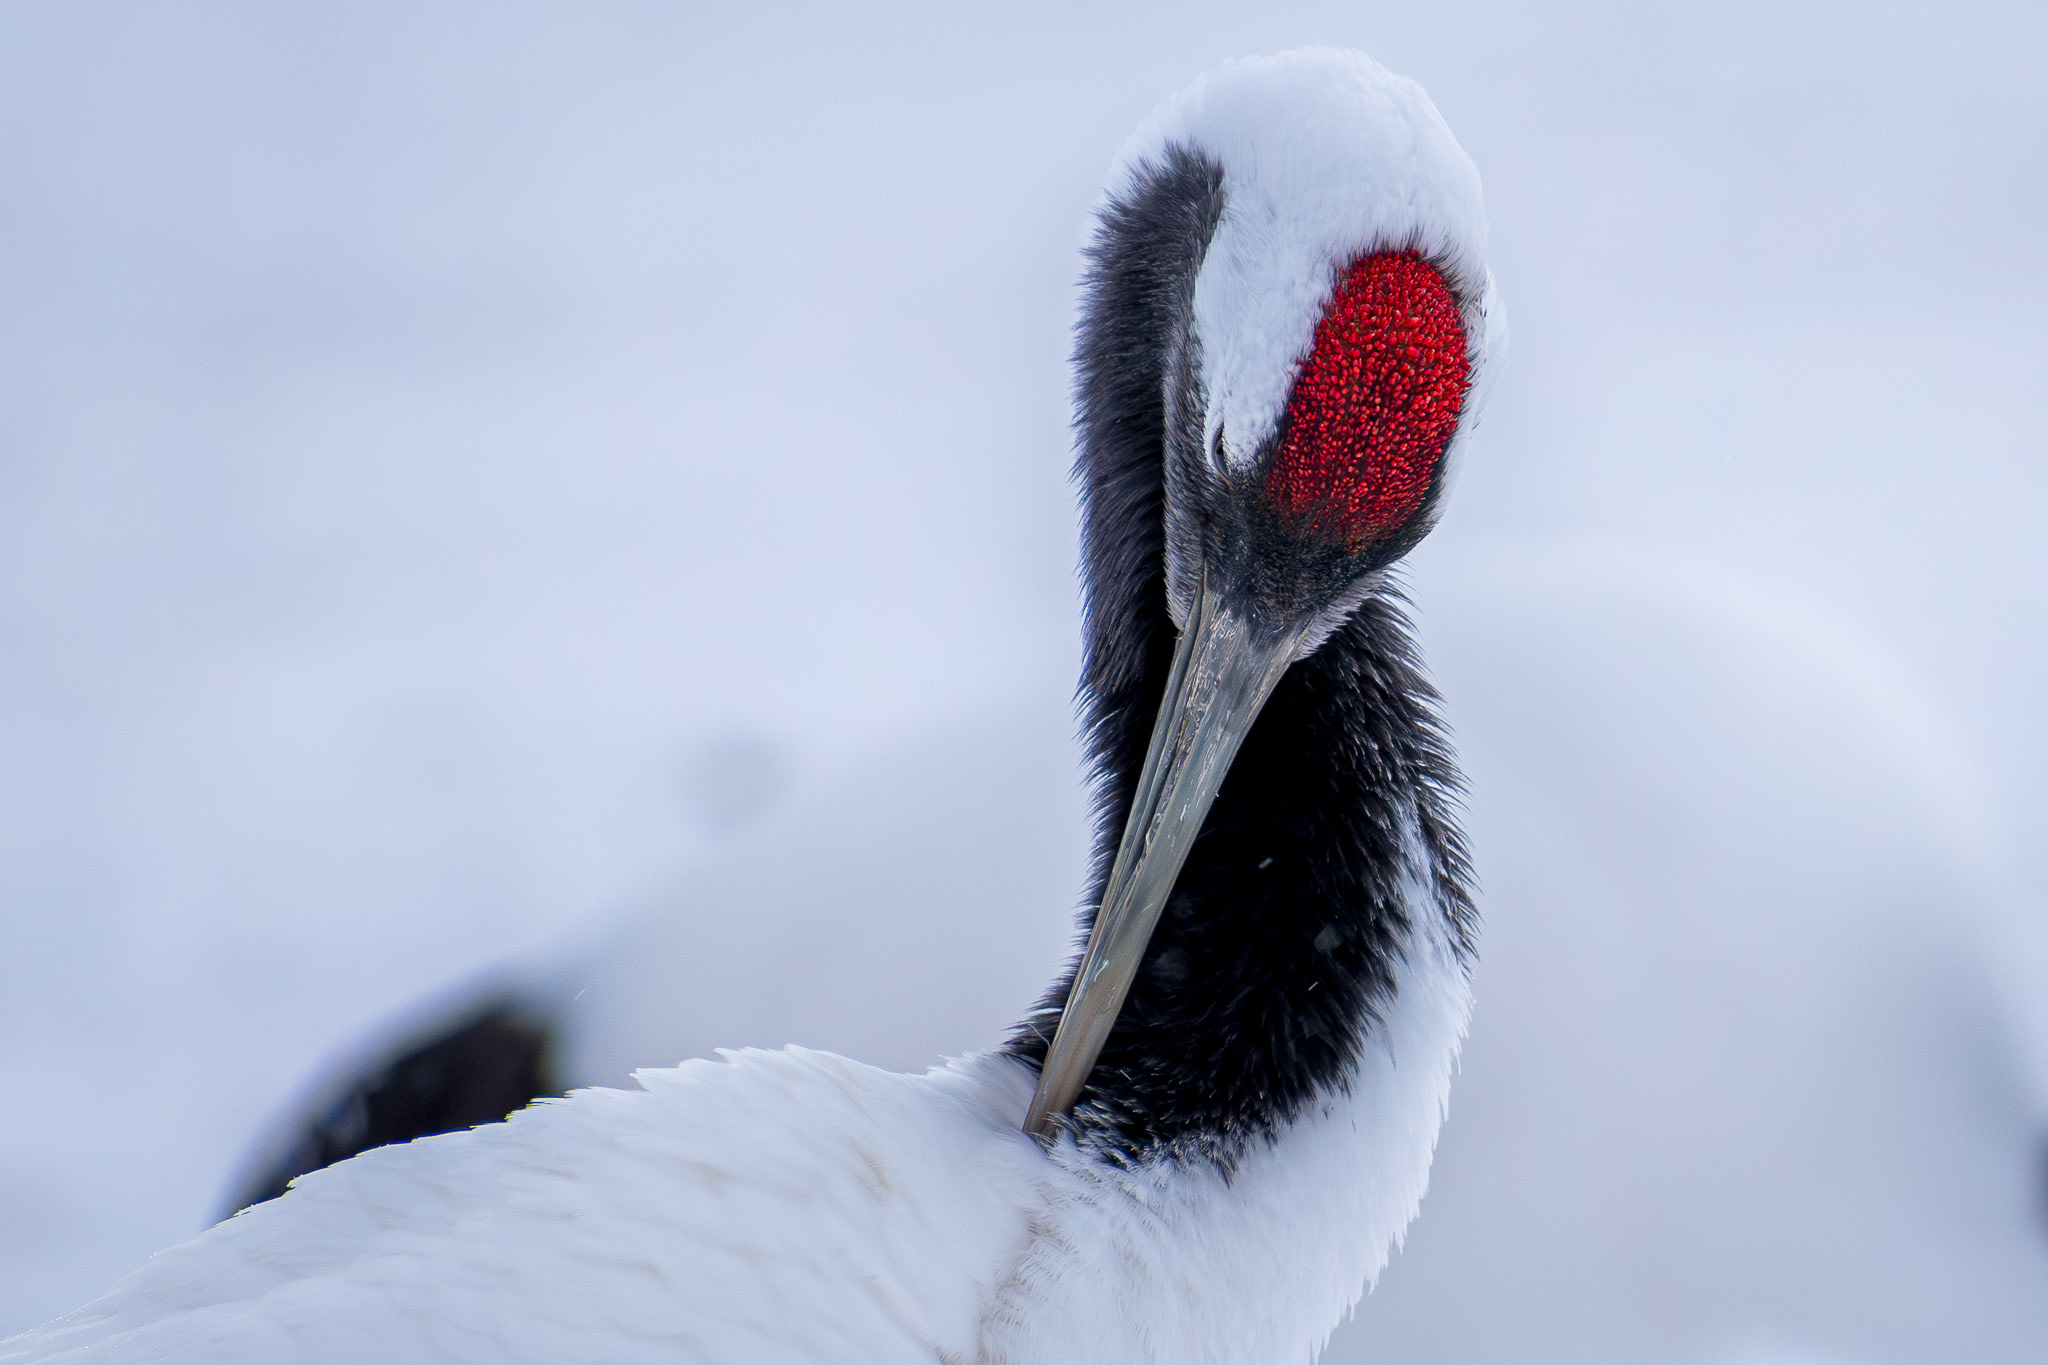 A red-crowned crane preening, the bright red crest on its head visible.